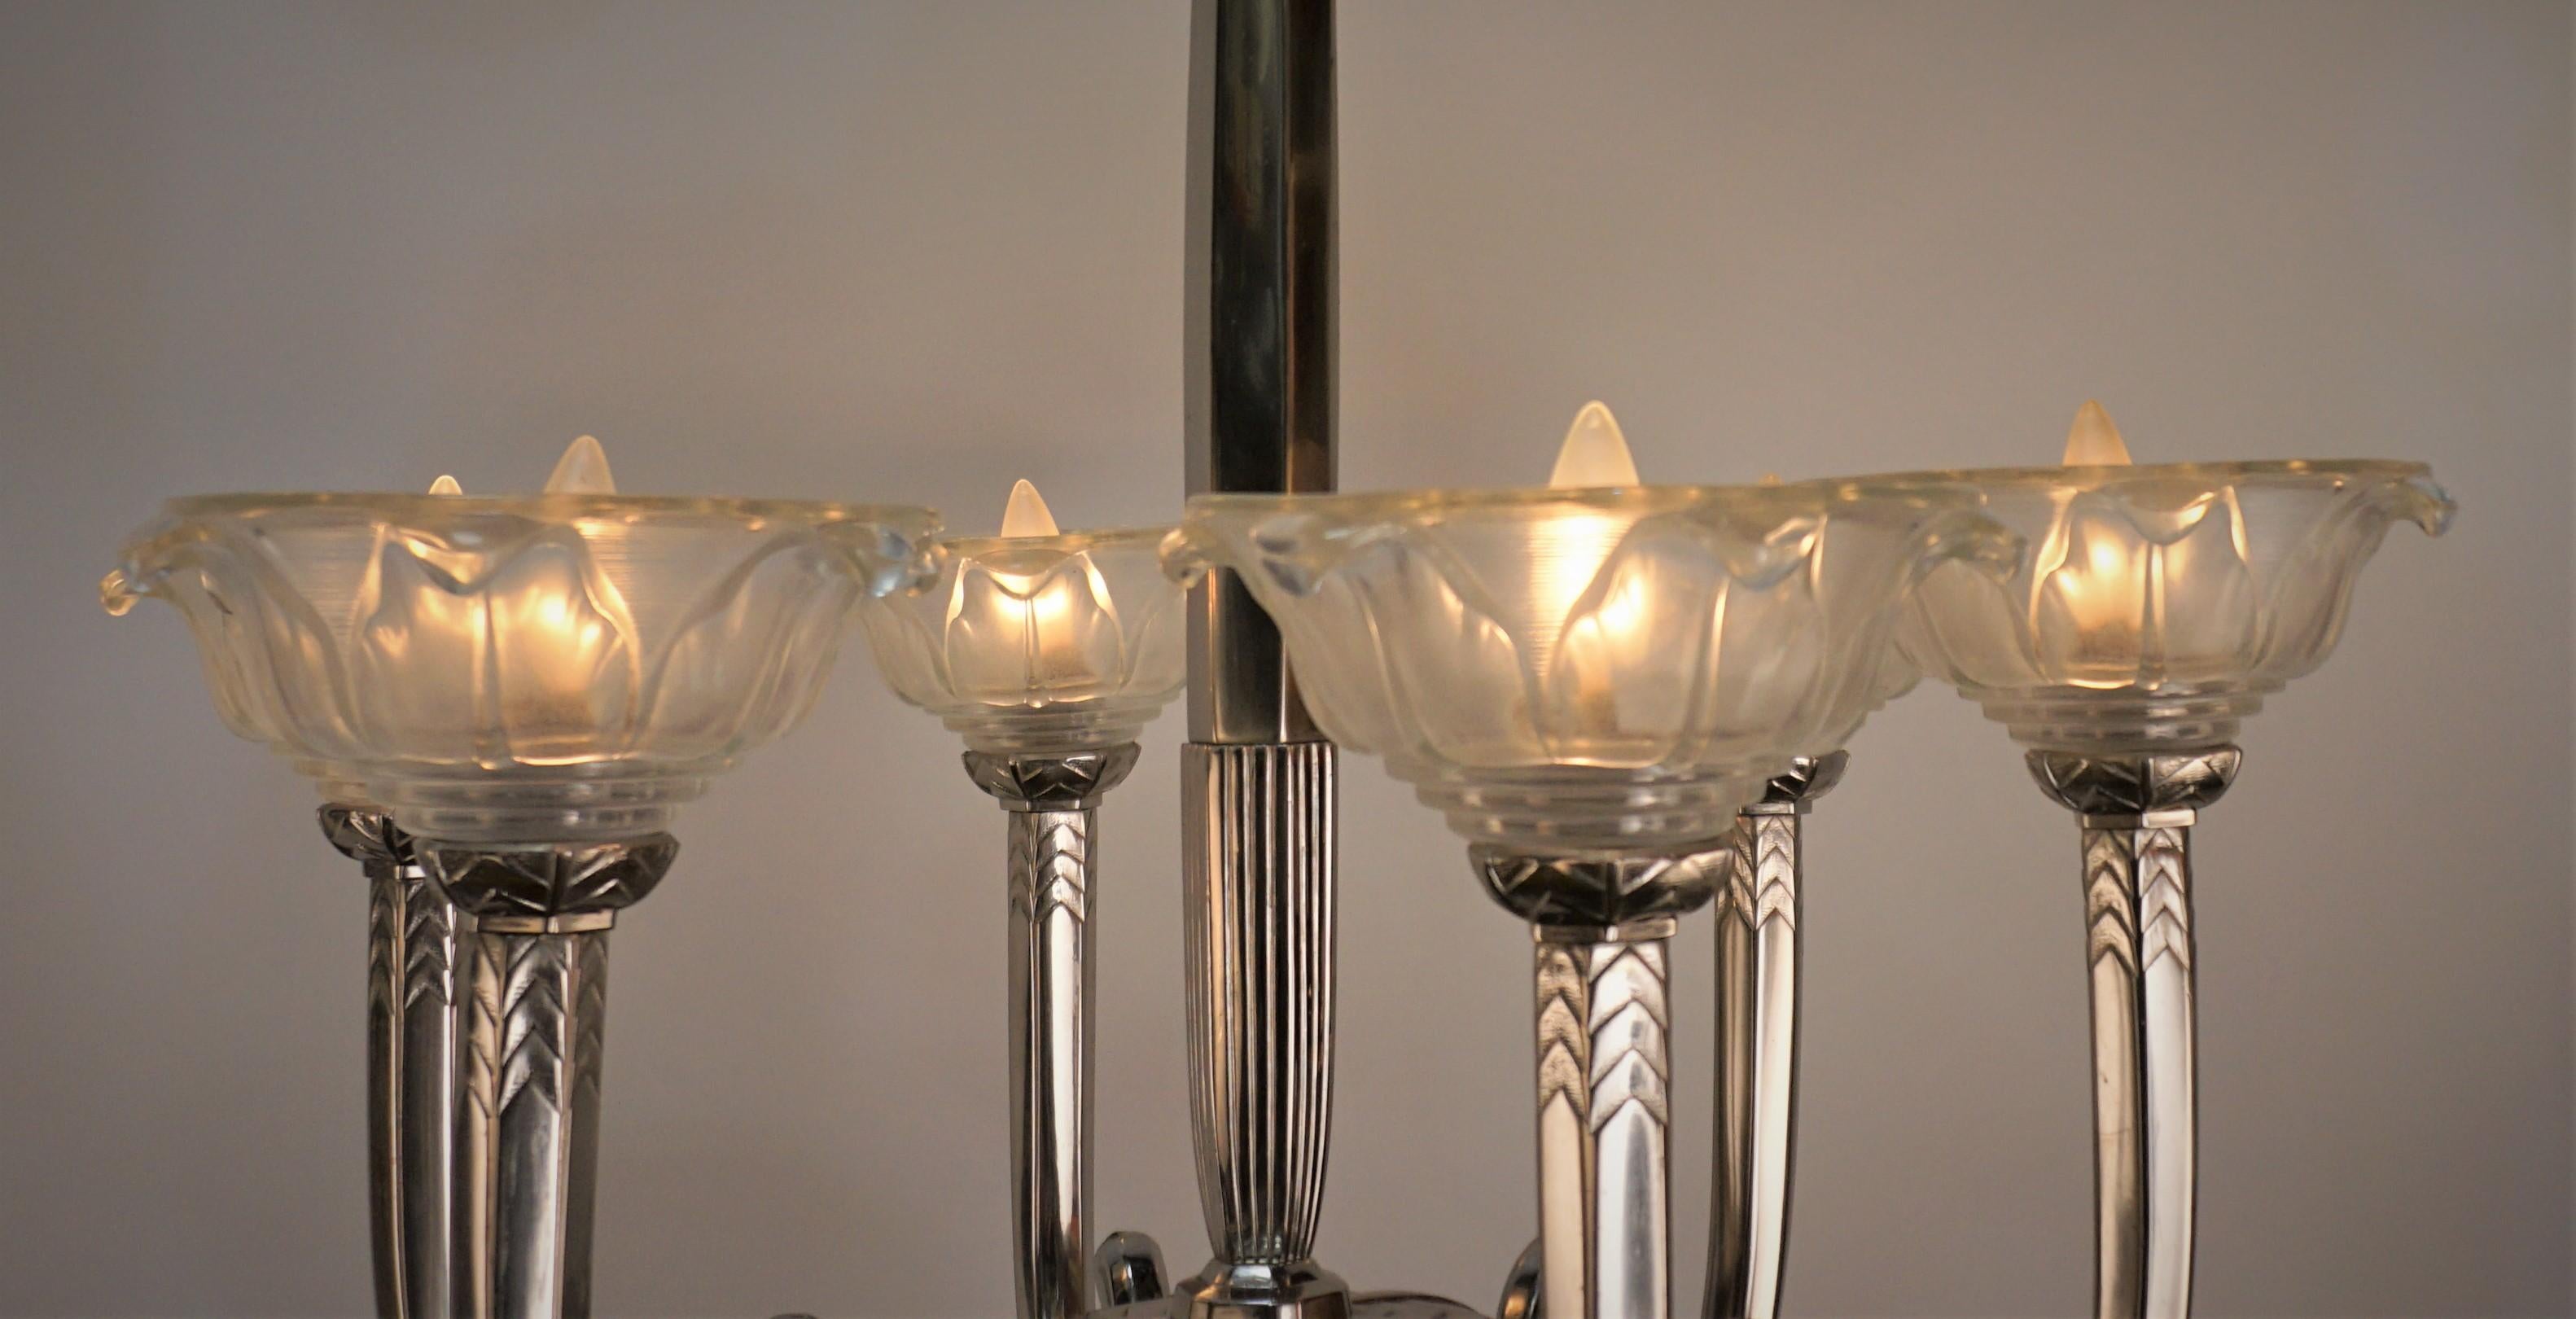 Elegant six arm nickel on bronze with clear frost glass shades art deco chandelier.